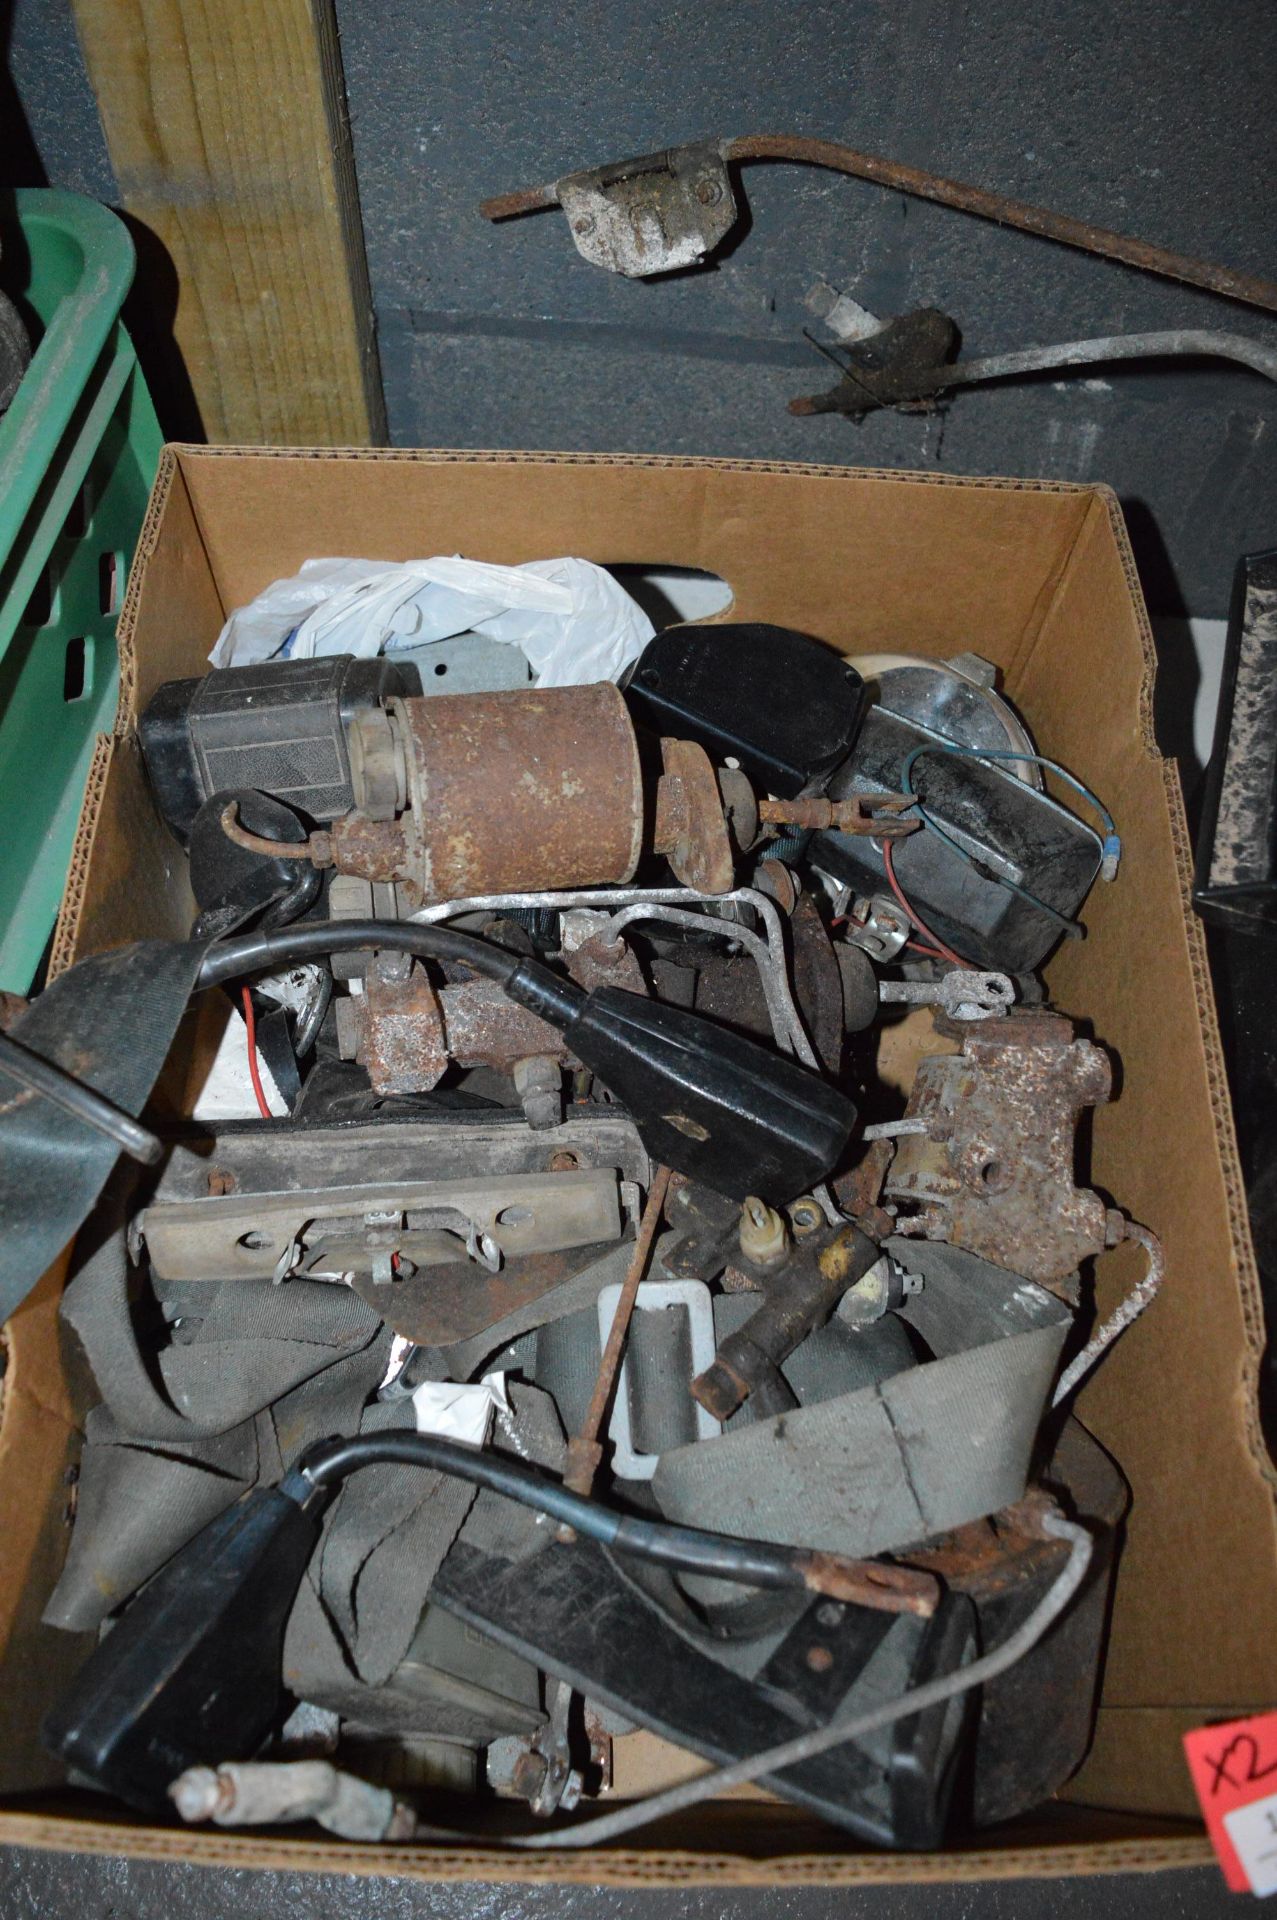 Two Boxes Containing Brake Cylinders, Mini Reservoirs, and a Mini Wiper Motor - Bild 2 aus 3